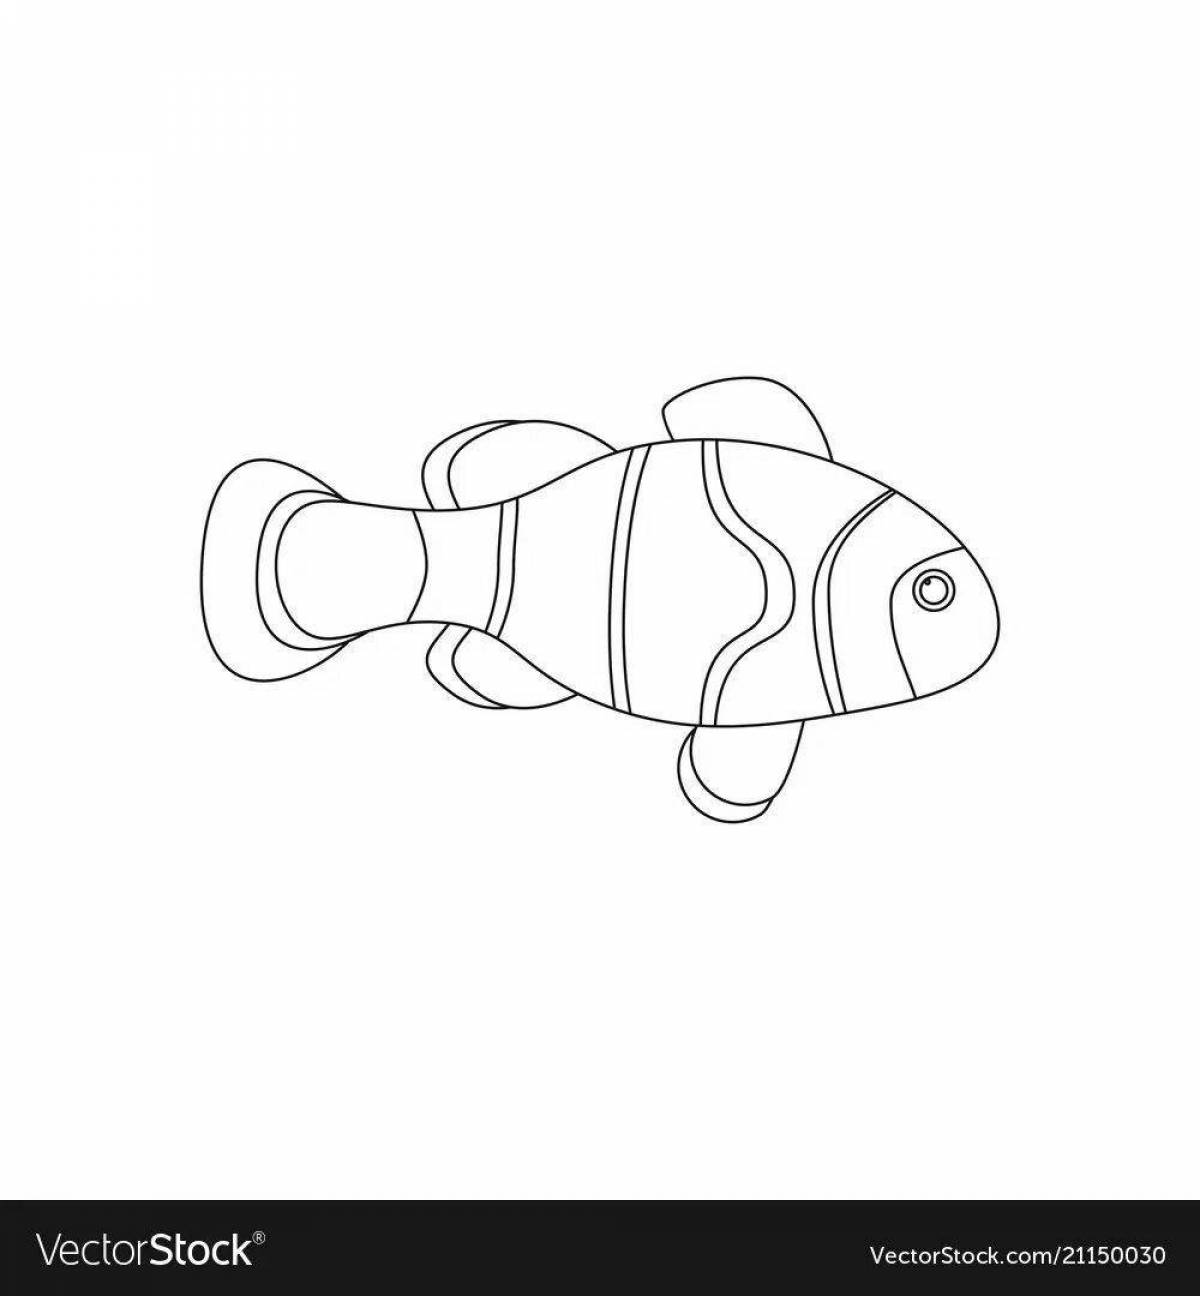 Animated drawing of a clownfish